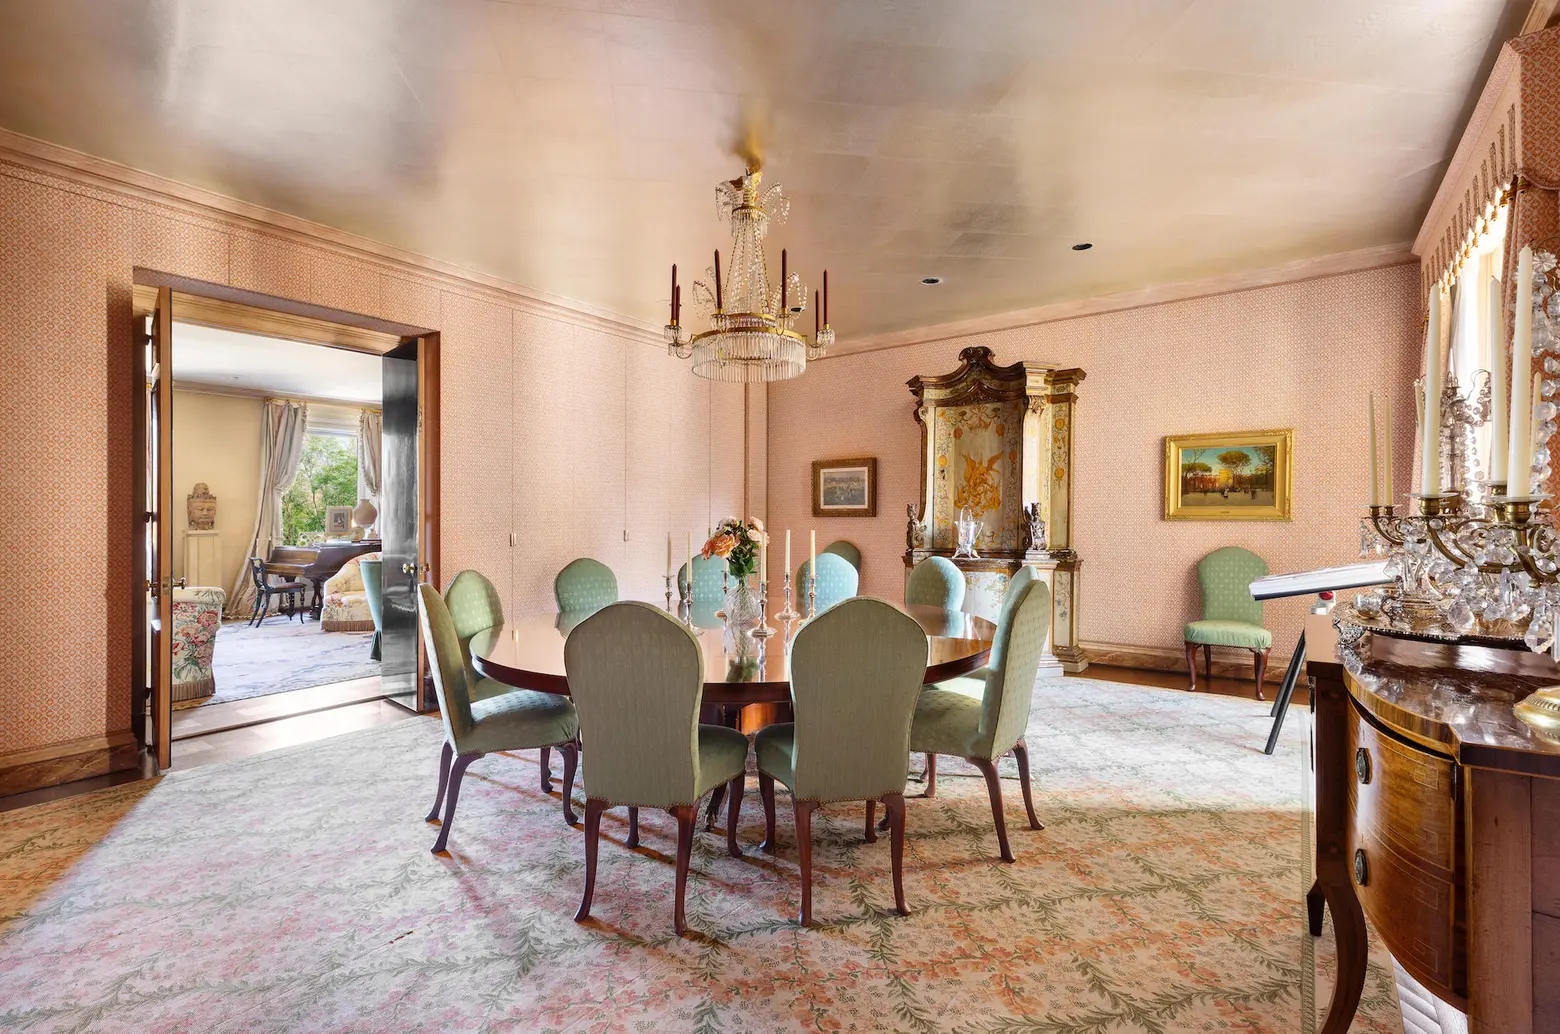 Barbara Walters' longtime Manhattan home finds a buyer